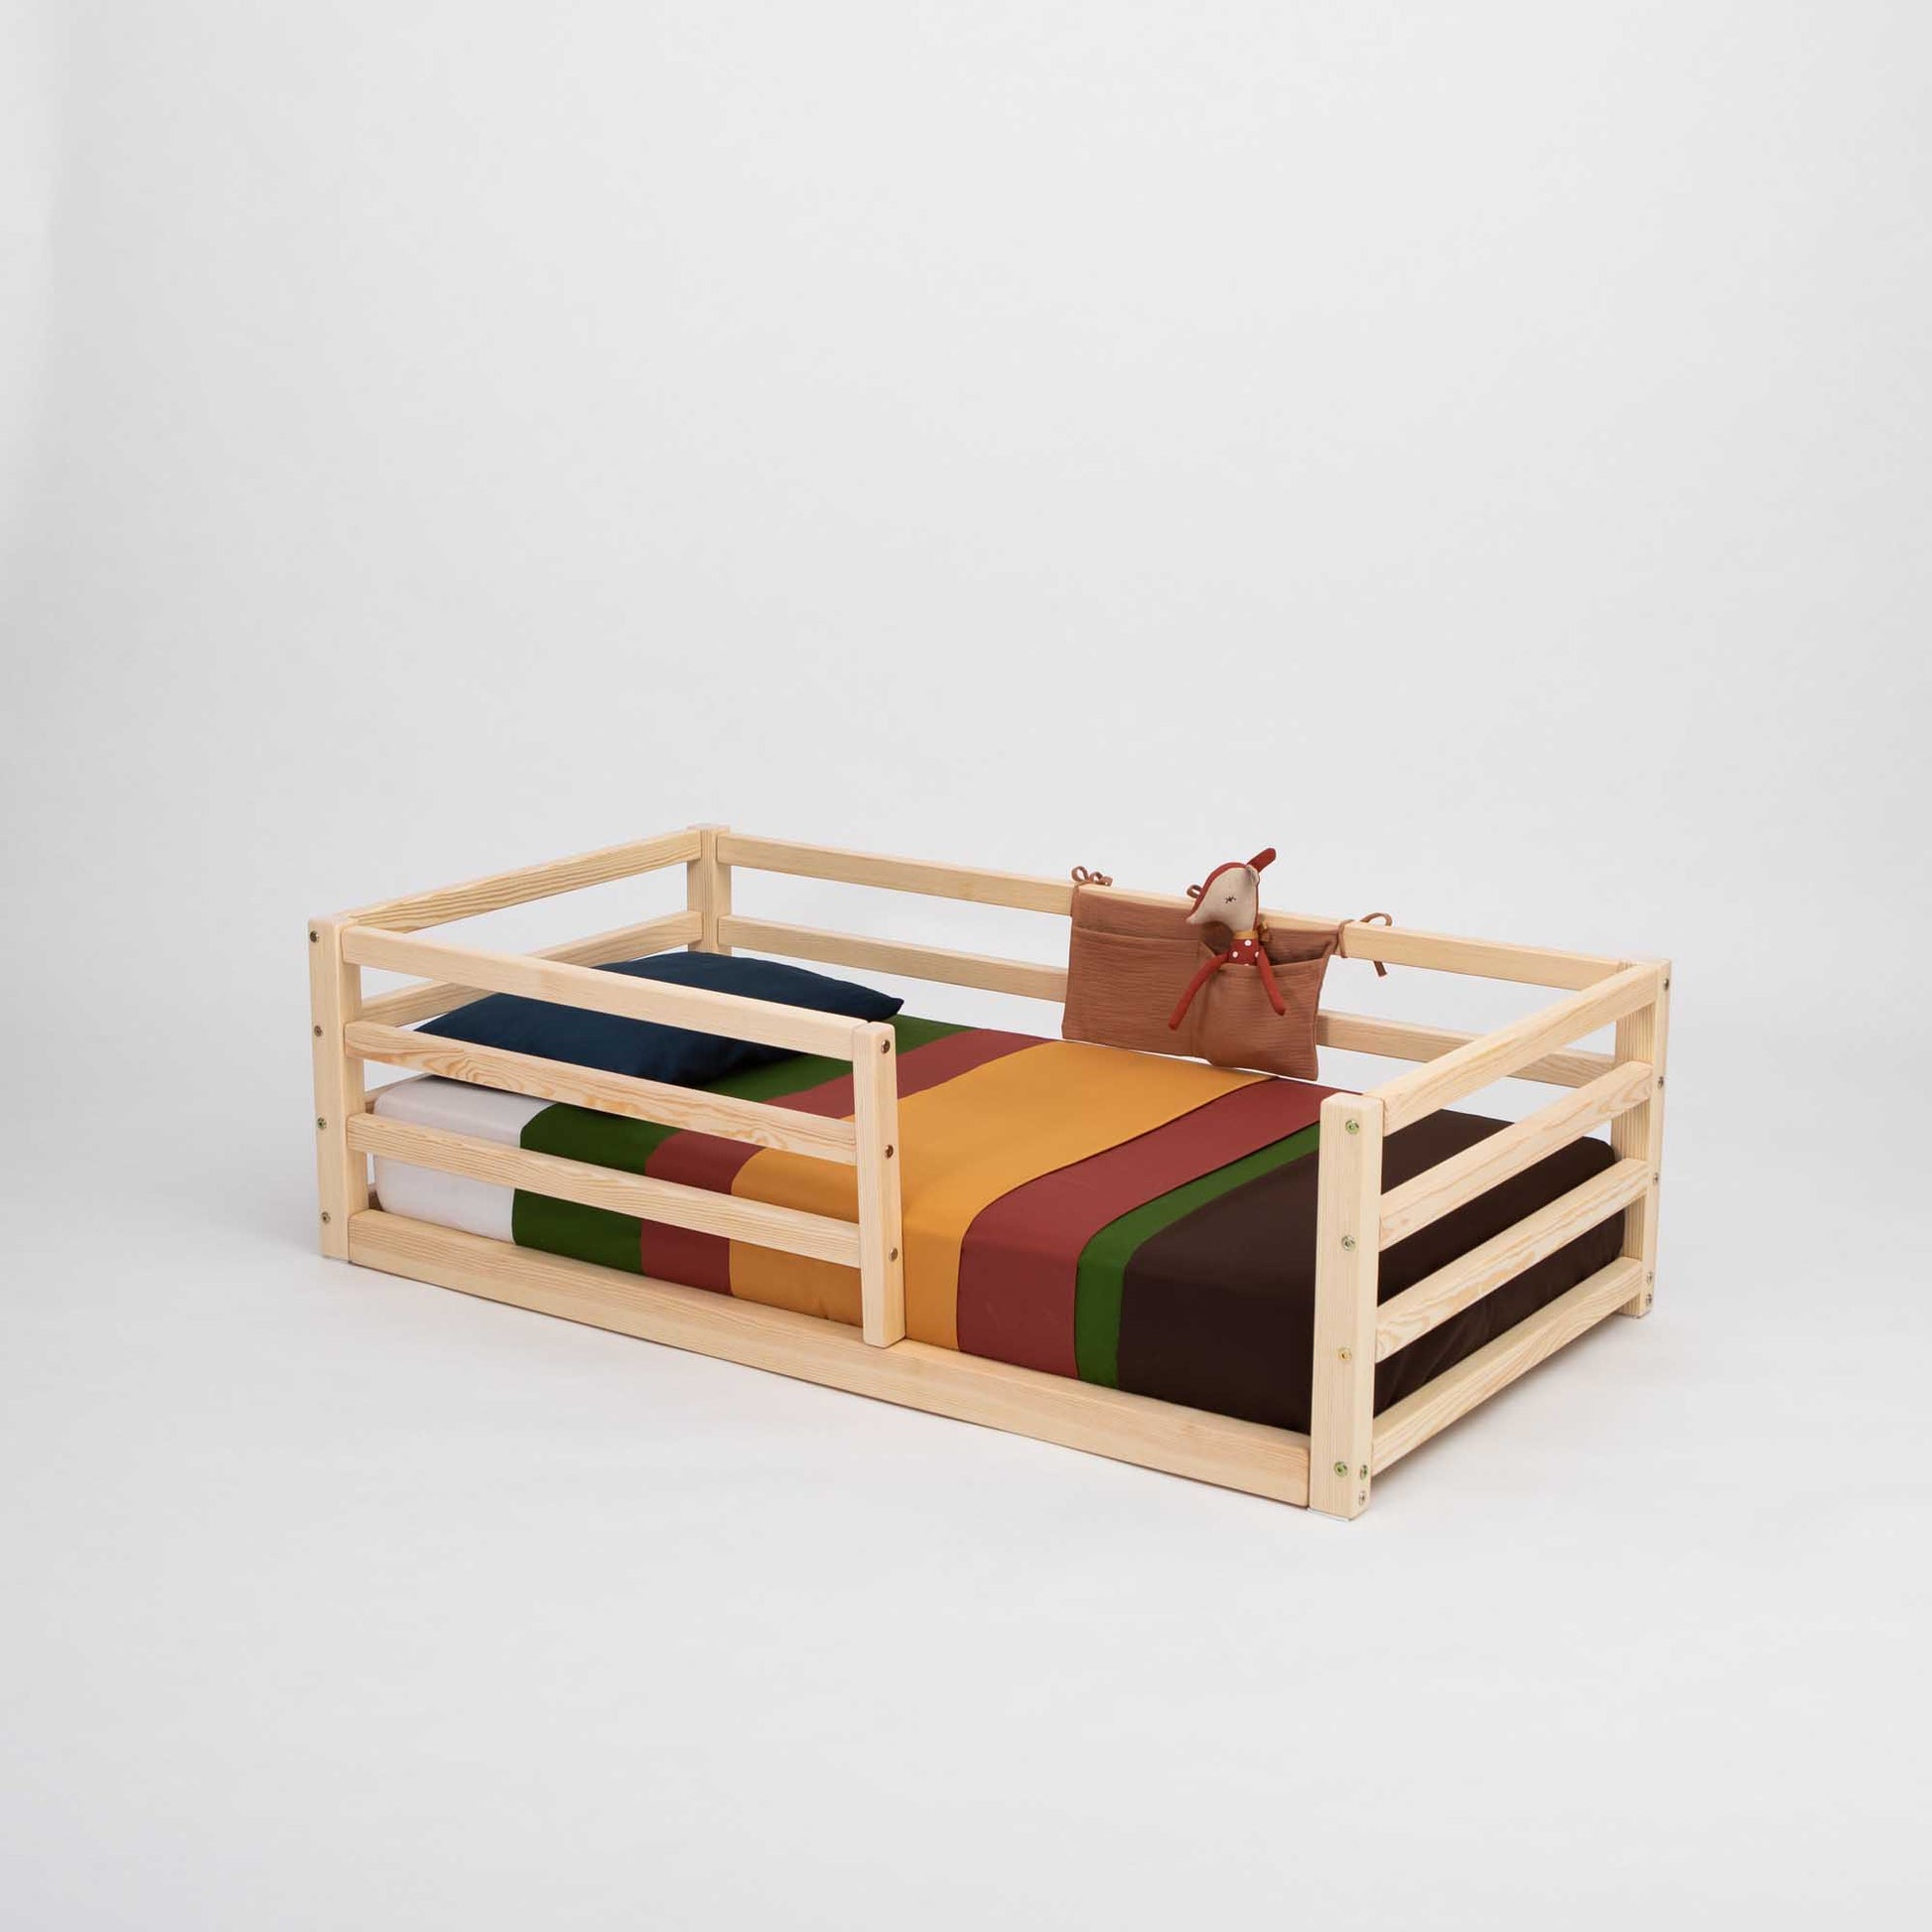 A colorful striped blanket adorns a child's Sweet Home From Wood 2-in-1 transformable kids' bed with a horizontal rail fence made of wood.